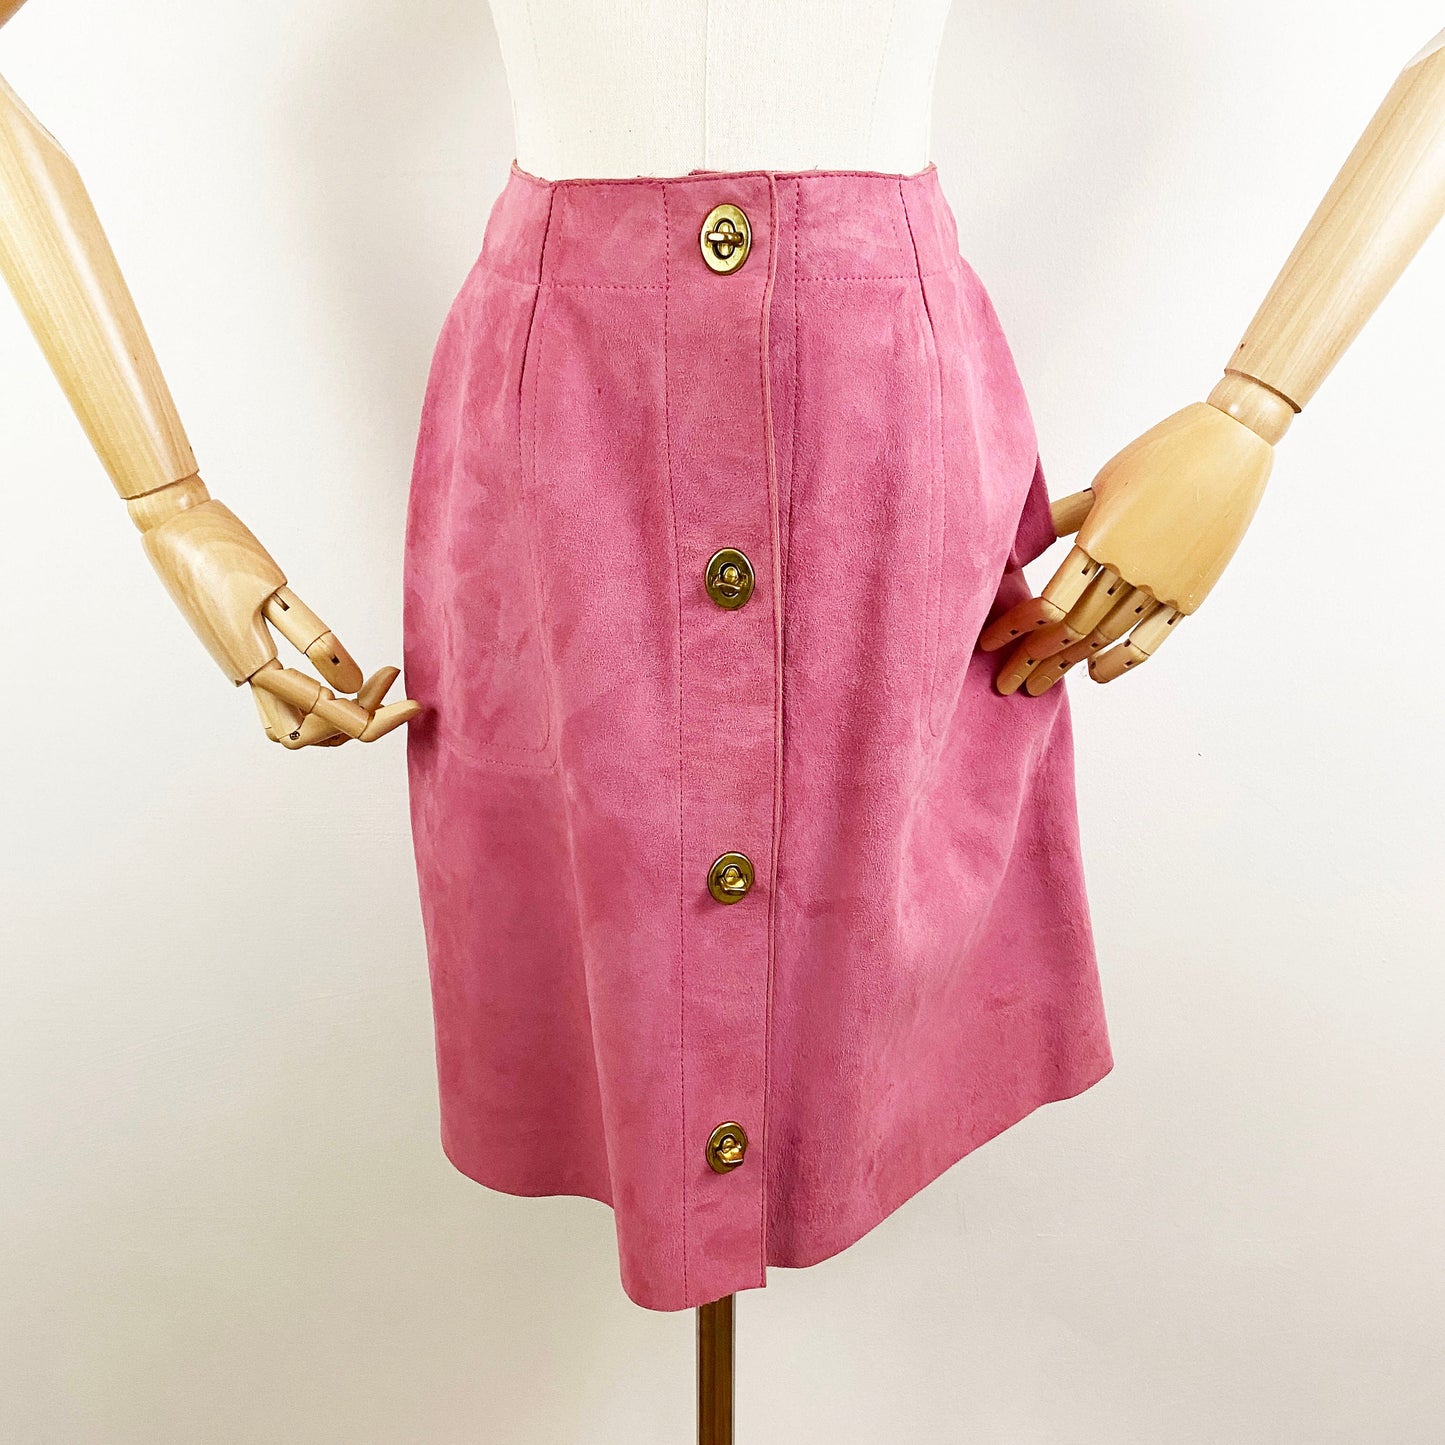 1960s Bonnie Cashin Sills Pink Rose Suede Leather Jacket and A-line Skirt Set Turn Lock Mod Minimalist Coach Designer Rare / Size Small